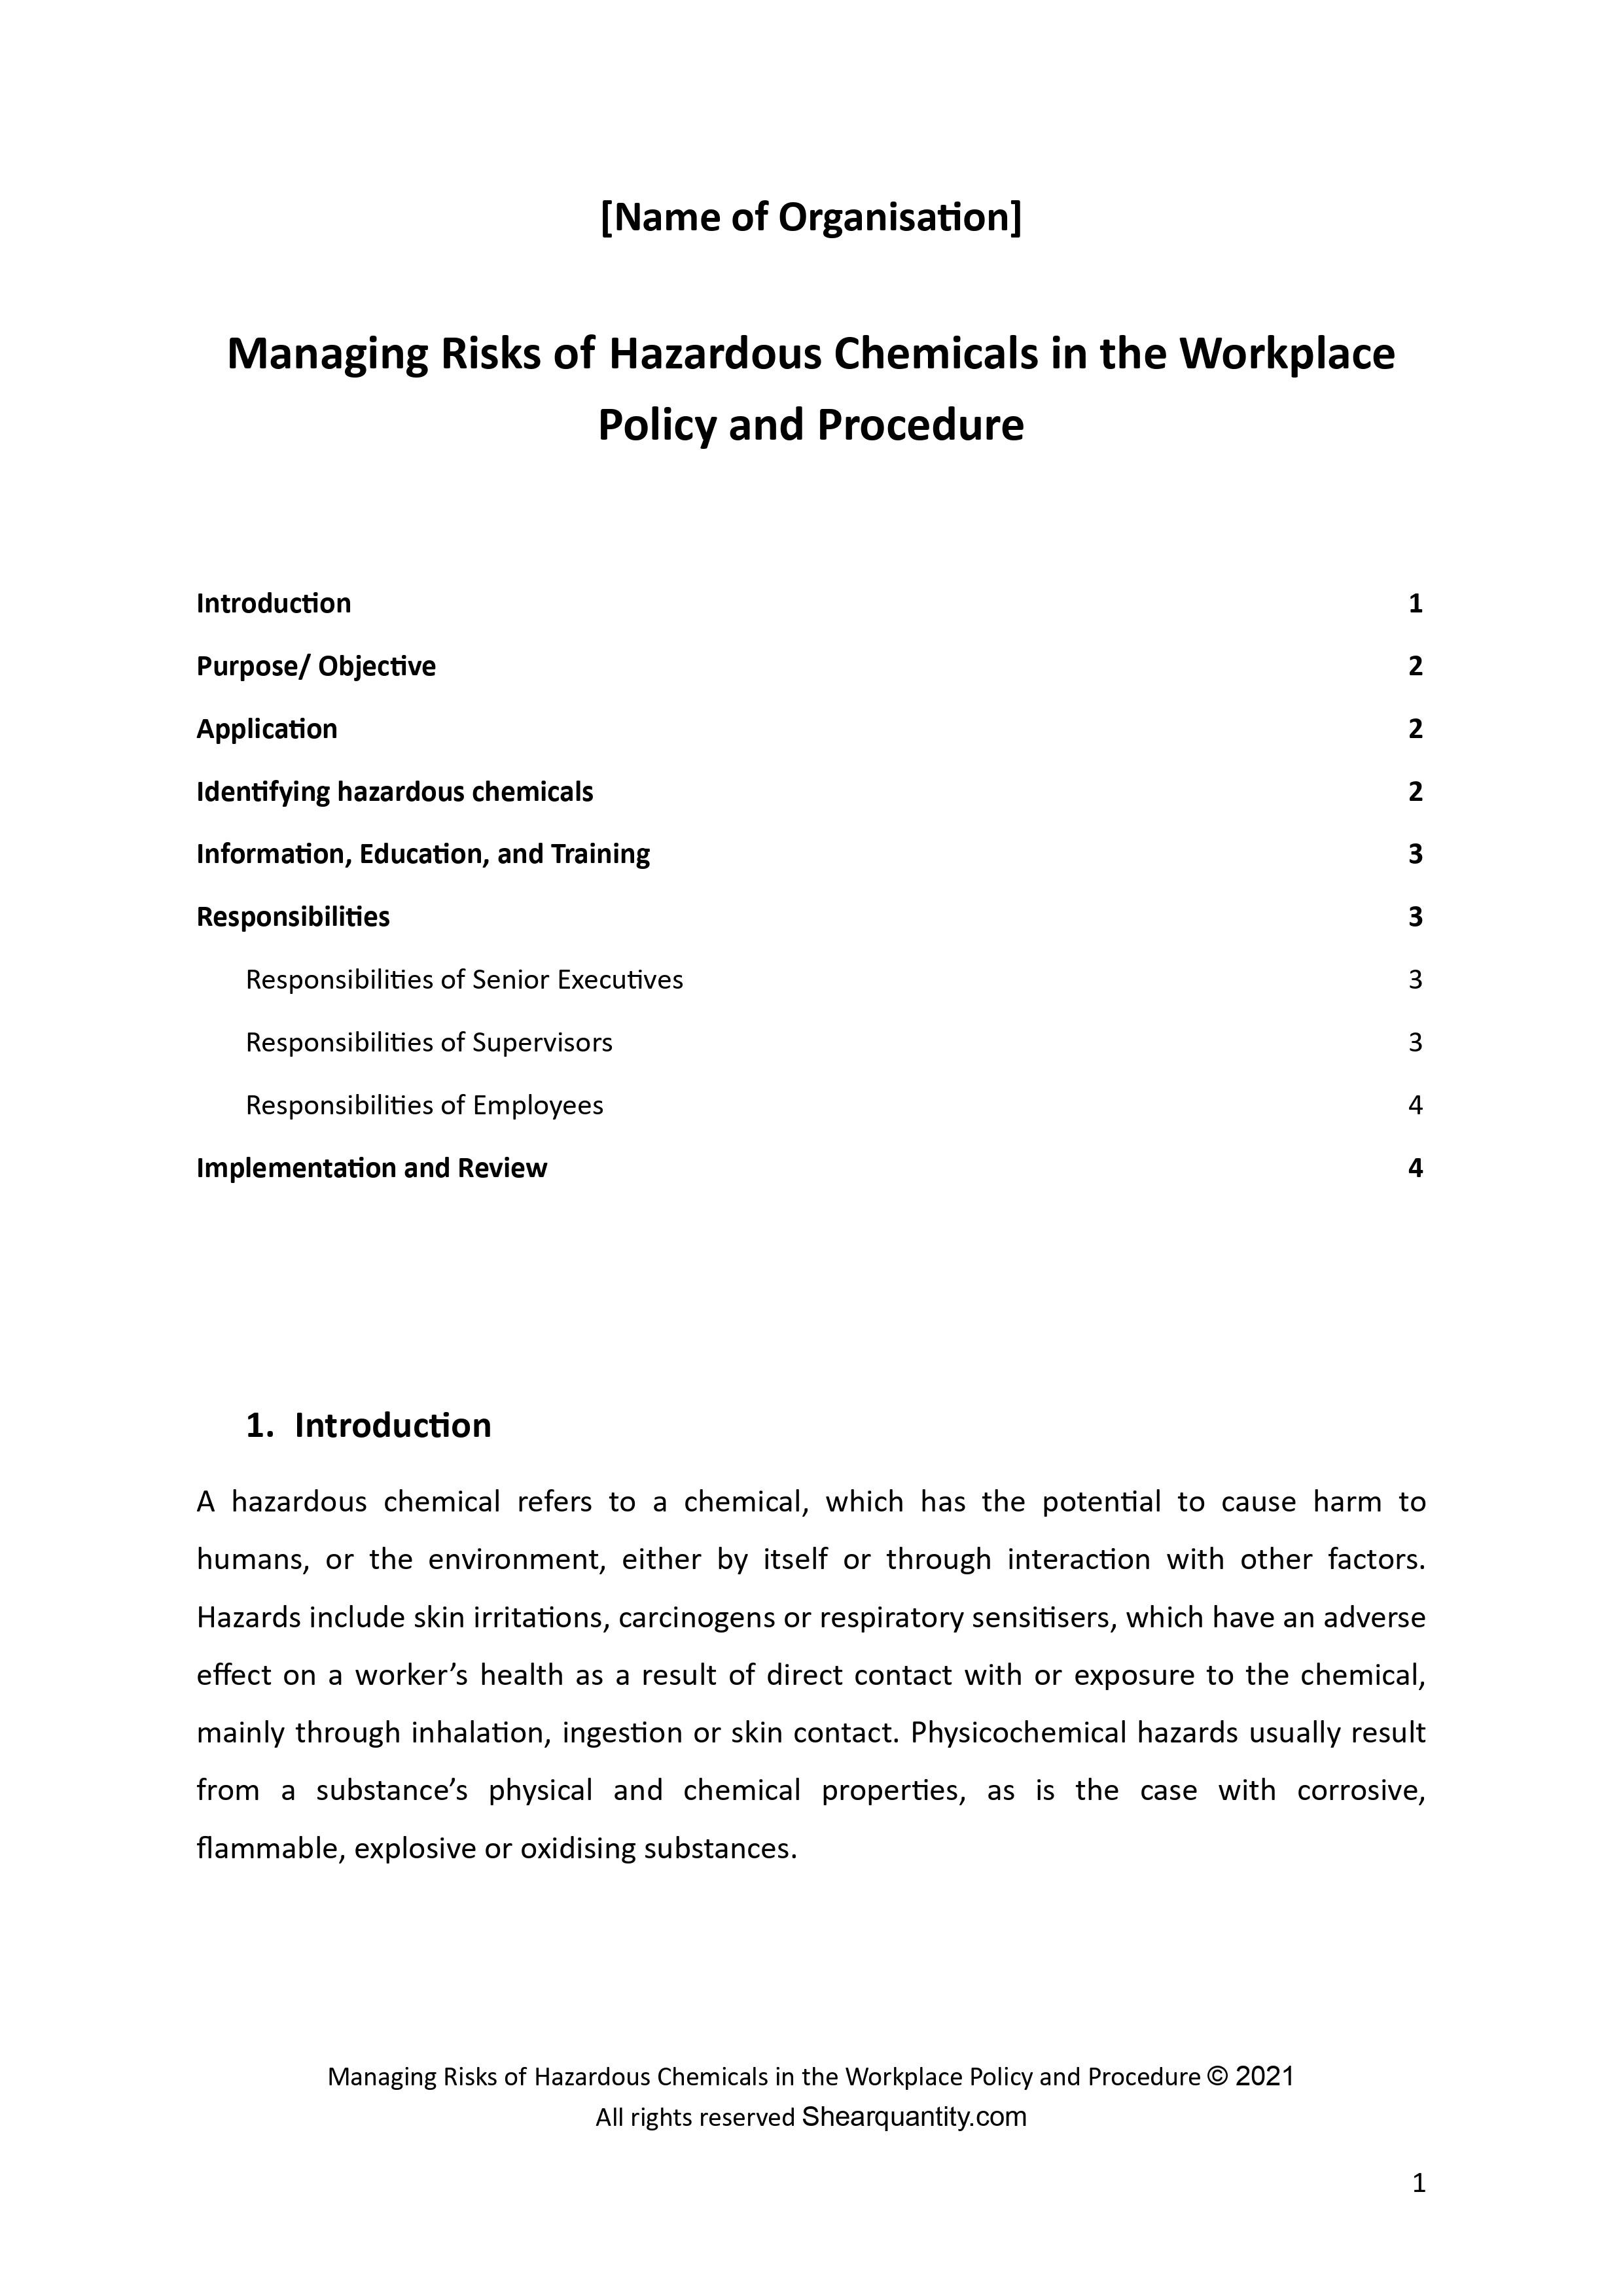 Managing Risks of Hazardous Chemicals in the Workplace Policy and Procedure